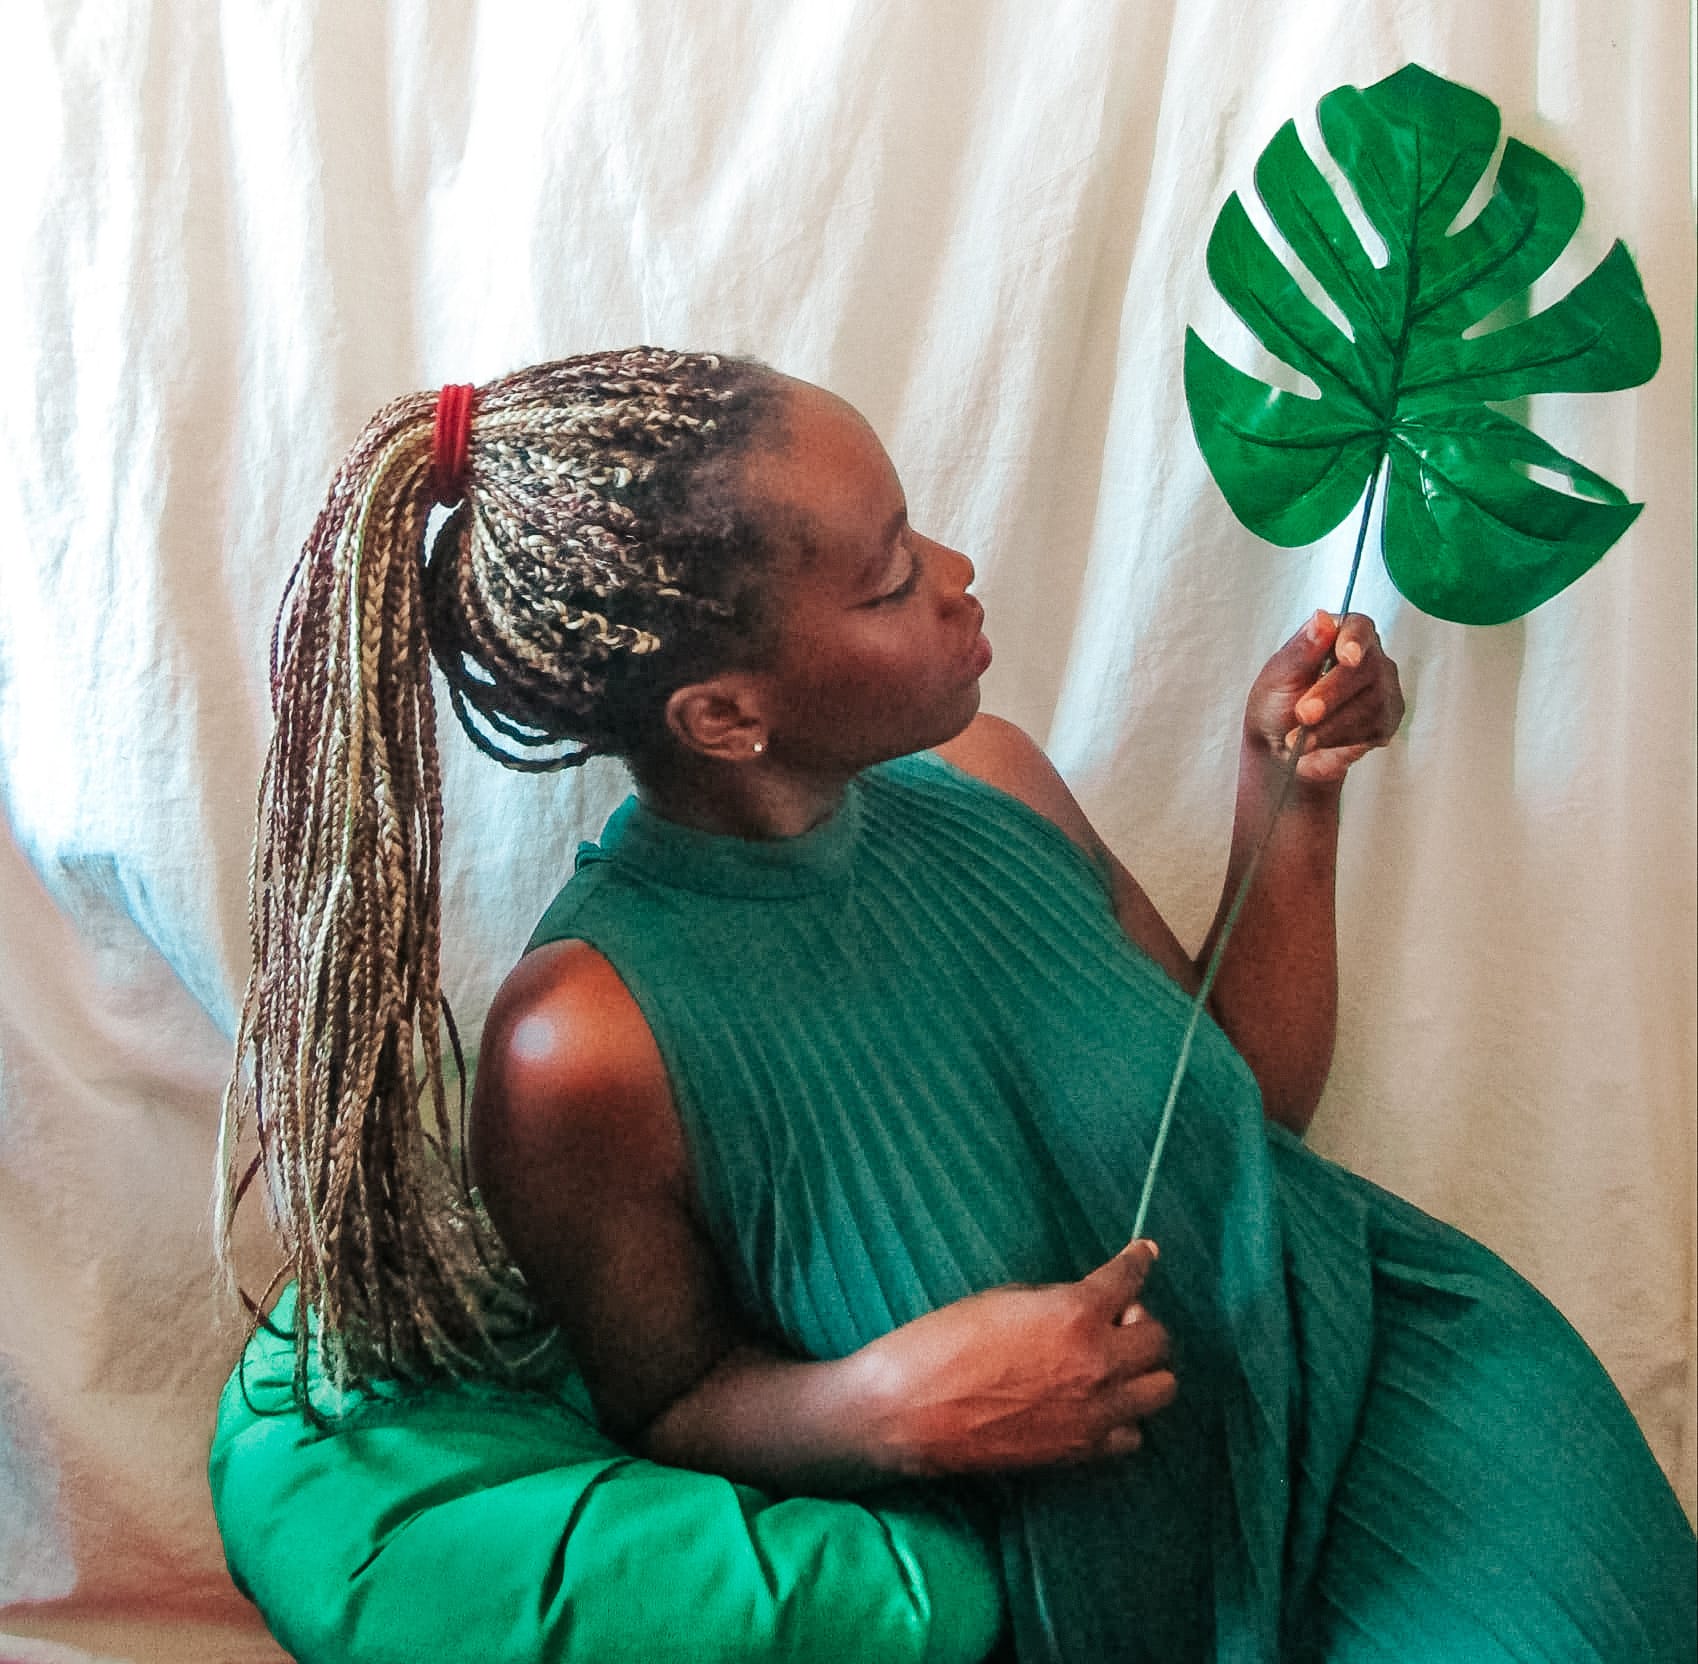 self-portrait - woman sitting on a green pillow holding a leaf in a playful manner